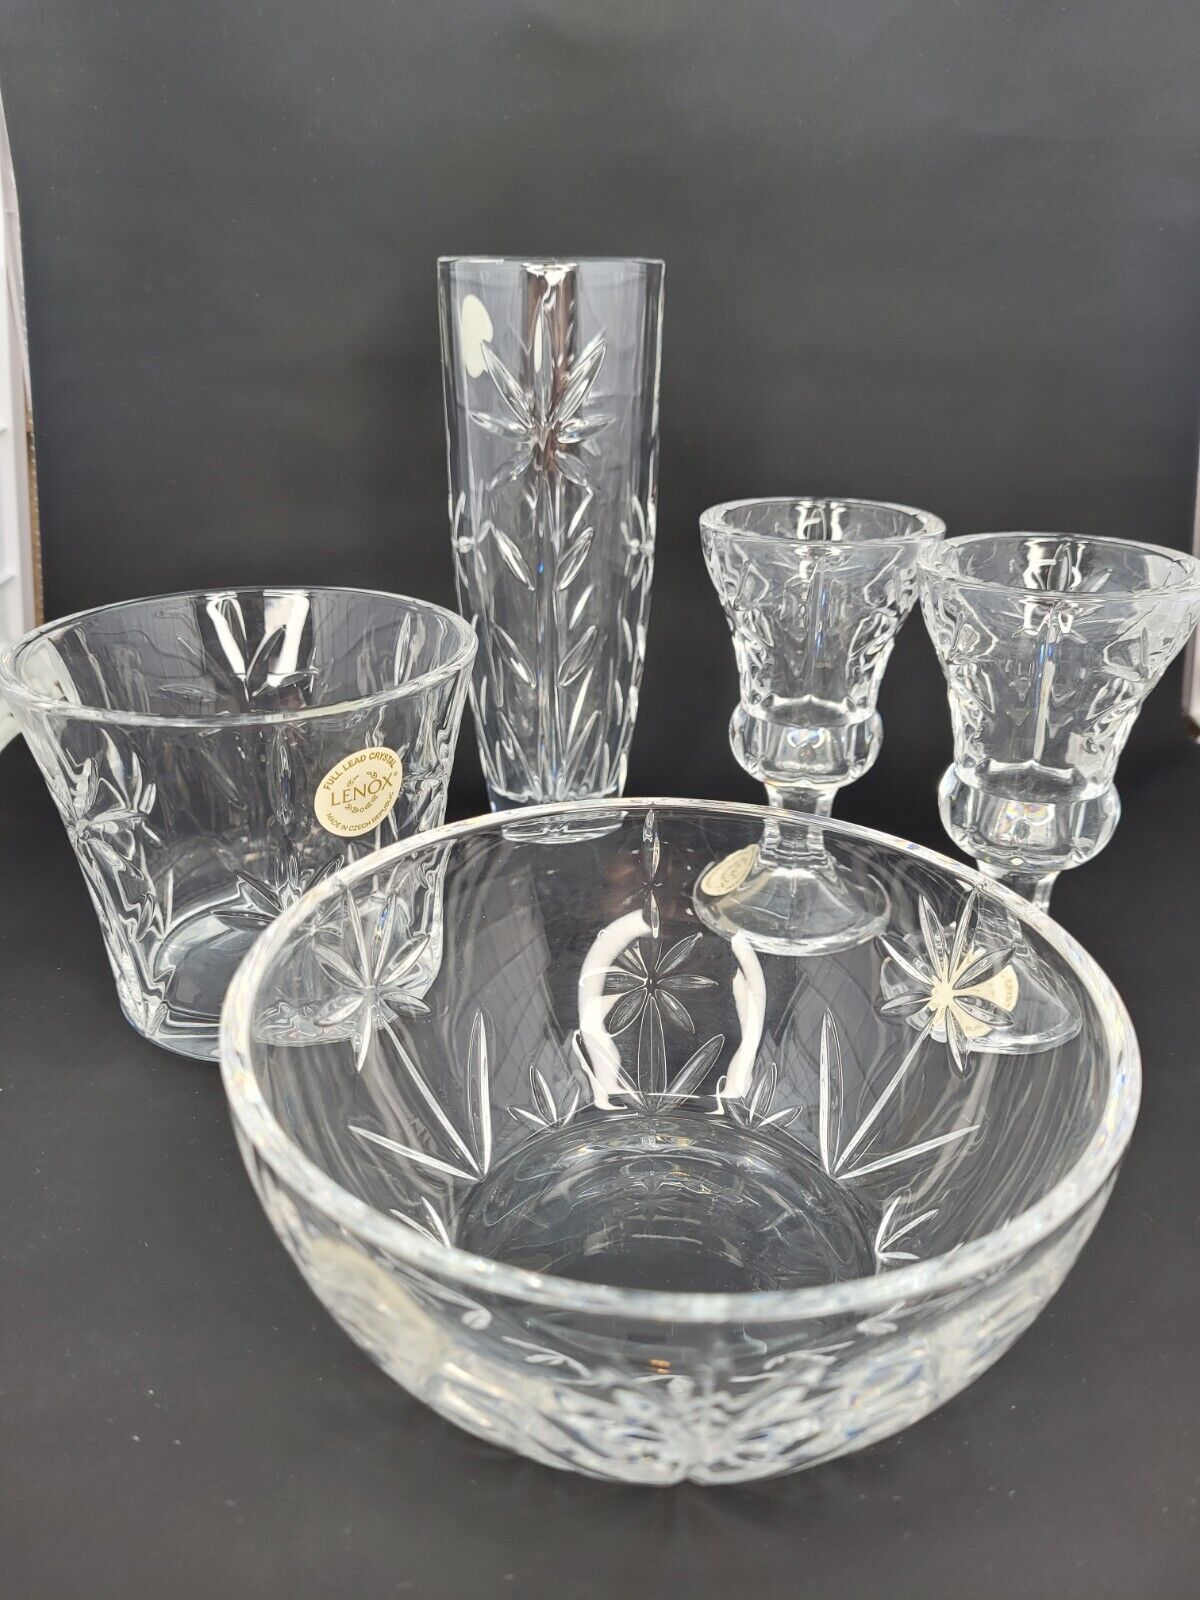 Lenox Set of Collections Crystal Floral Majesty, 5 Pieces